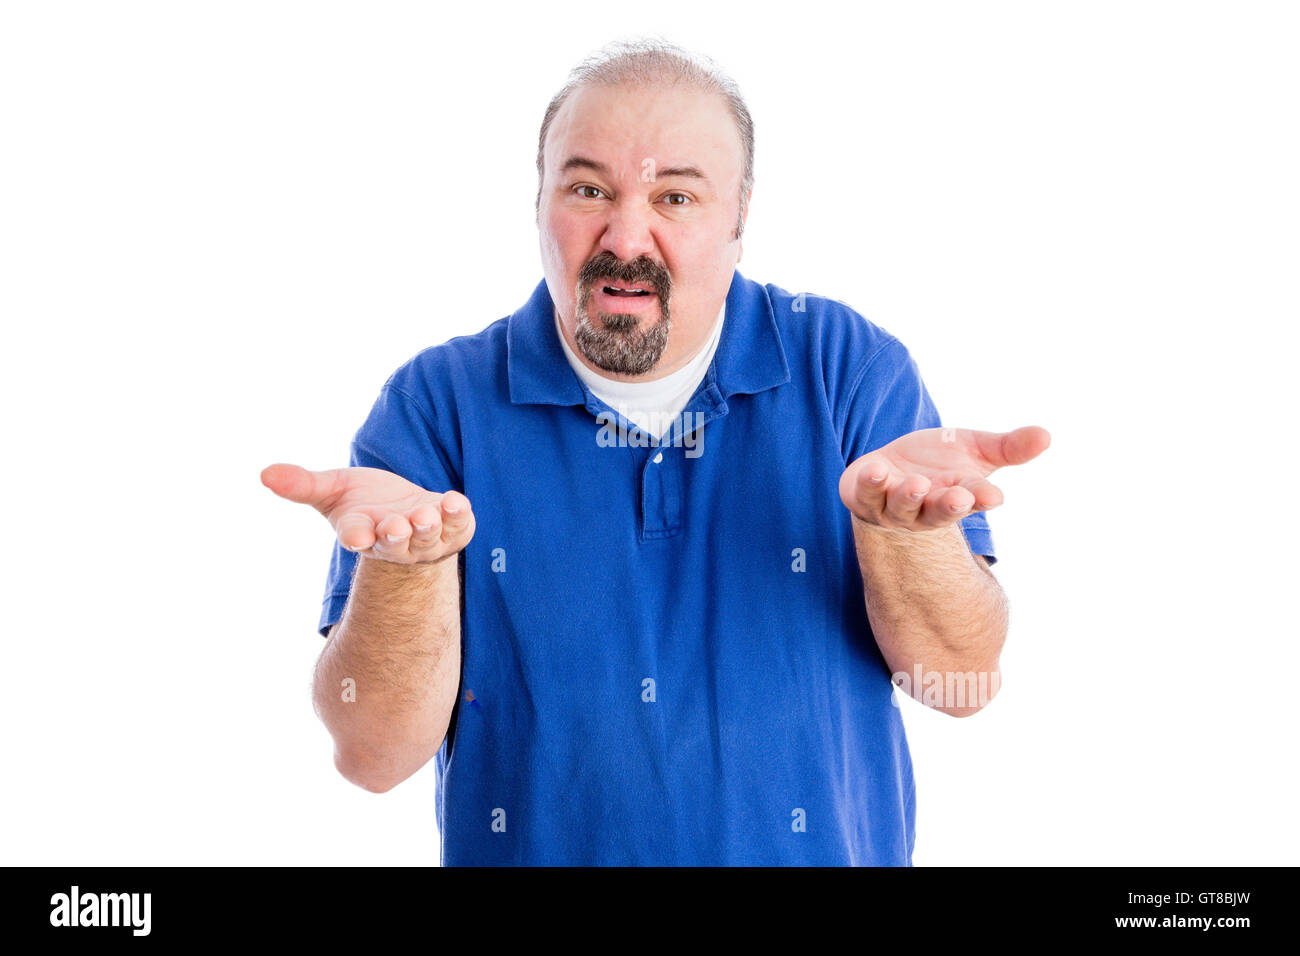 Middle-aged derisive man shrugging his shoulders and gesticulating as he shows his ignorance and disdain, isolated on white Stock Photo